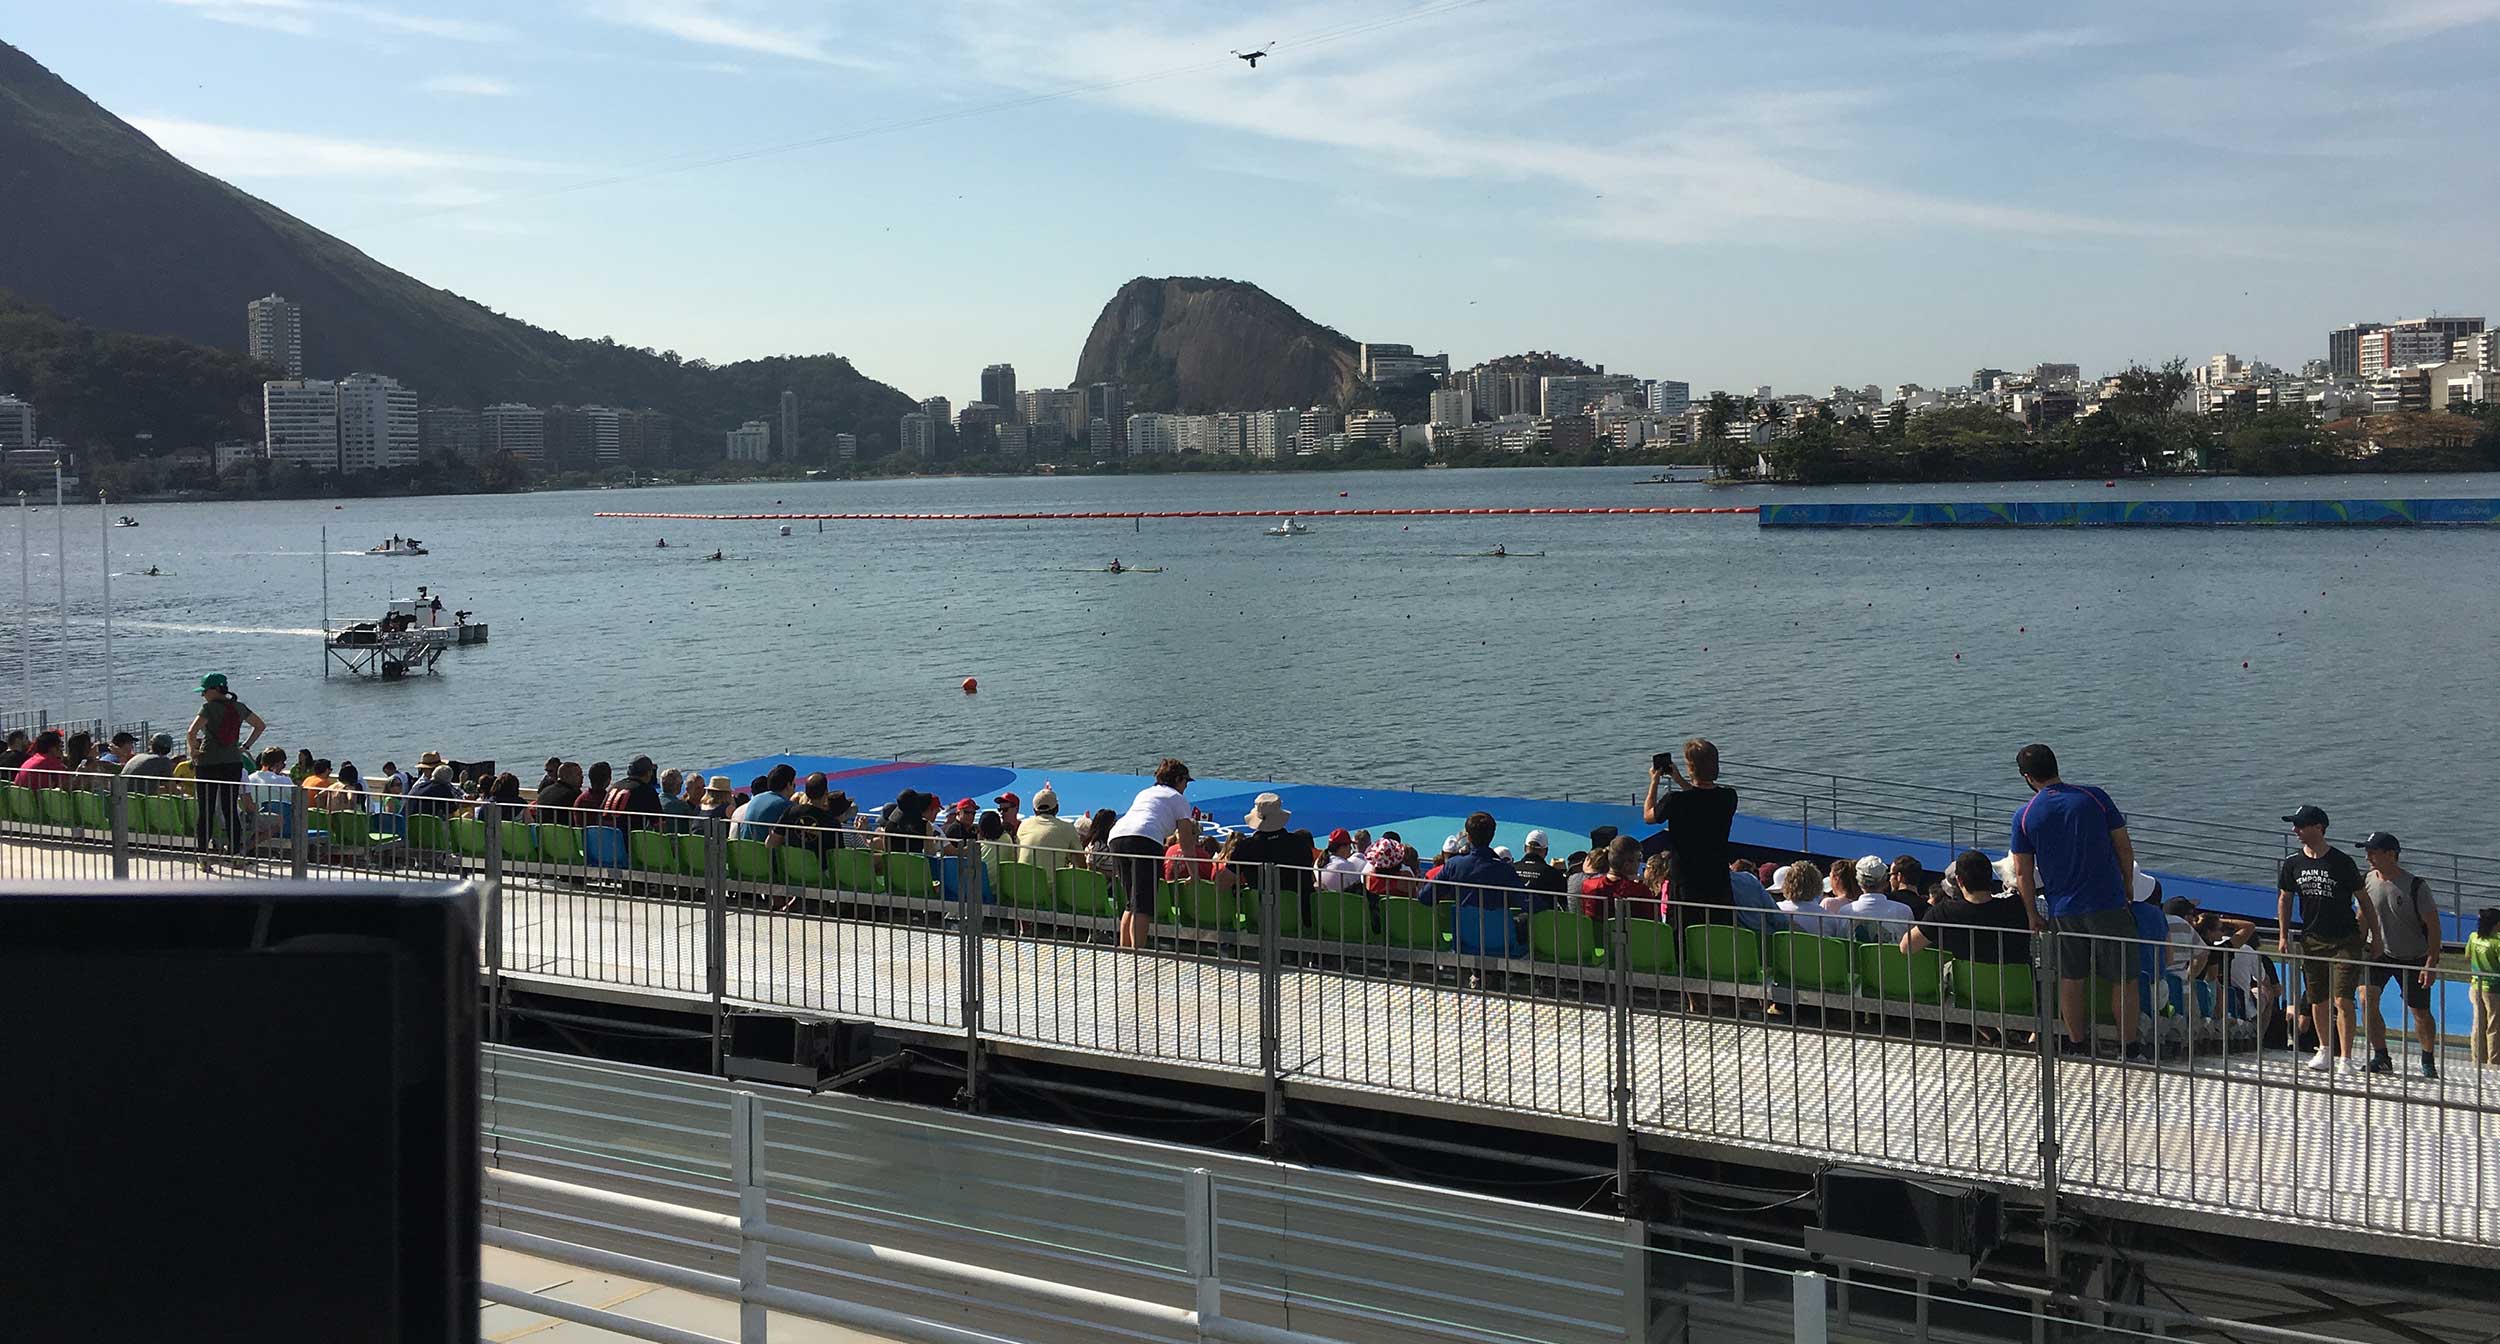 Rowers compete in the Olympics in Rio de Janeiro